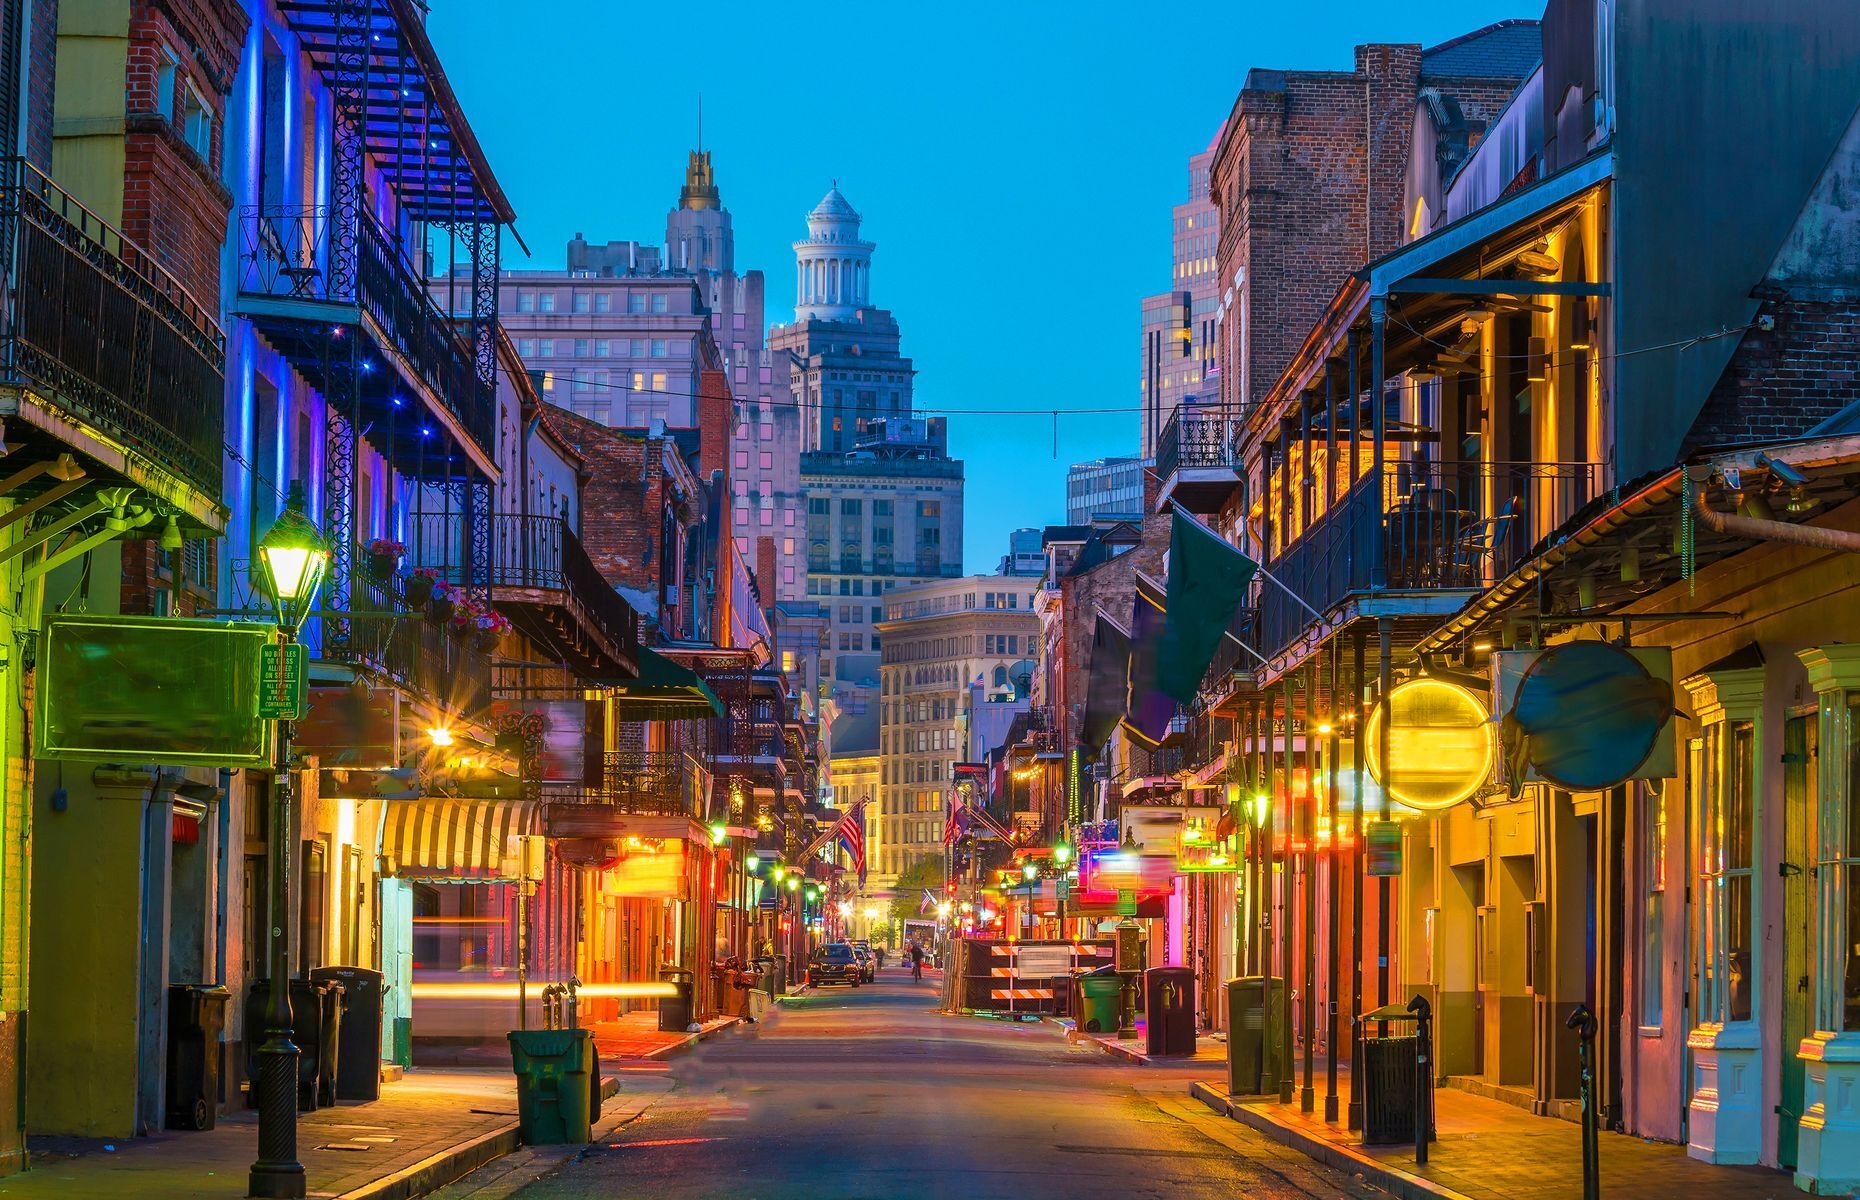 <p>New Orleans, Louisiana, has everything a Scorpio is looking for in a travel destination: tradition, magic, music and more. Those born between October 23 and November 21 will find their <a href="https://www.mindbodygreen.com/articles/scorpio">love for all things mysterious and mystical</a> fostered by learning about the <a href="https://www.neworleans.com/things-to-do/multicultural/traditions/voodoo/">spiritual voodoo history</a> of New Orleans. <a href="https://matadornetwork.com/read/zodiac-travel-scorpios/">According to MatadorNetwork.com</a>, “you can let your mind wander as you peruse the whimsical winding streets that almost seem stuck in time.”</p>